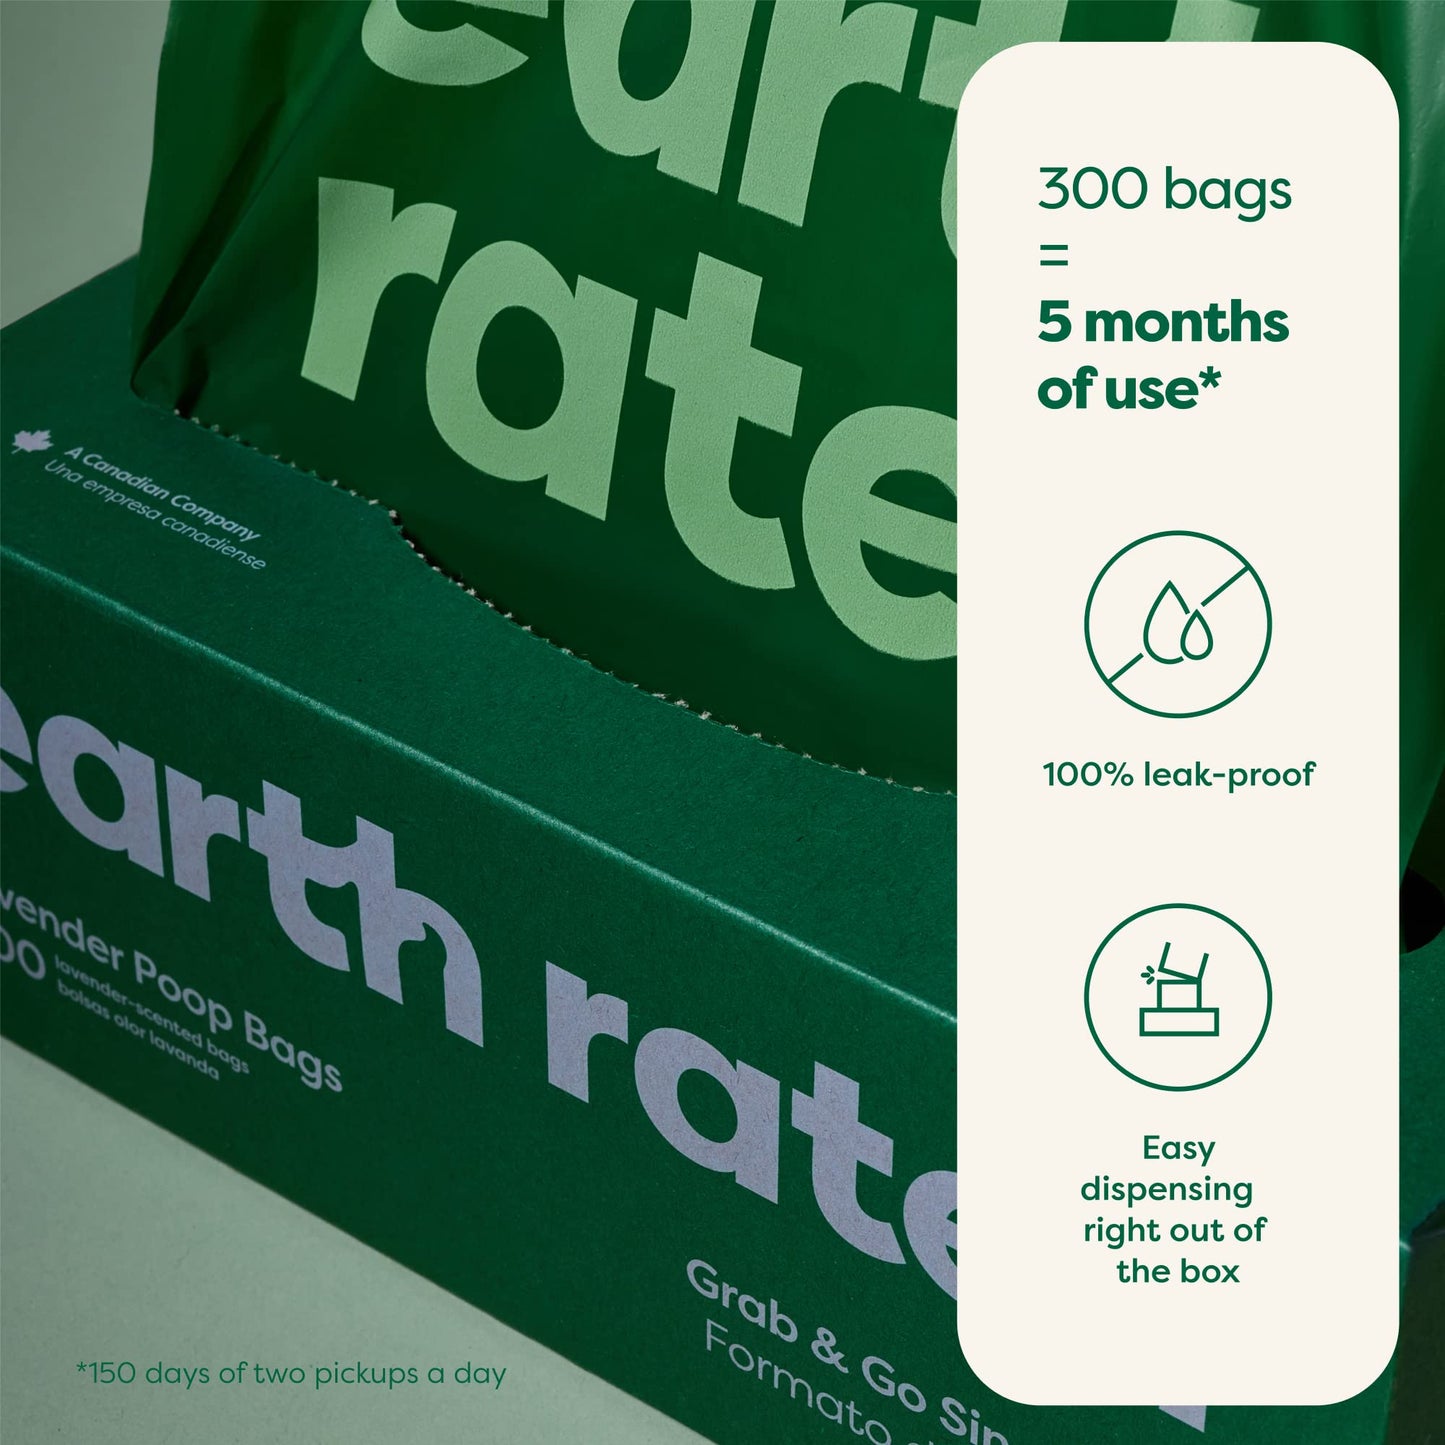 Earth Rated Dog Poop Bags, 300 Bags